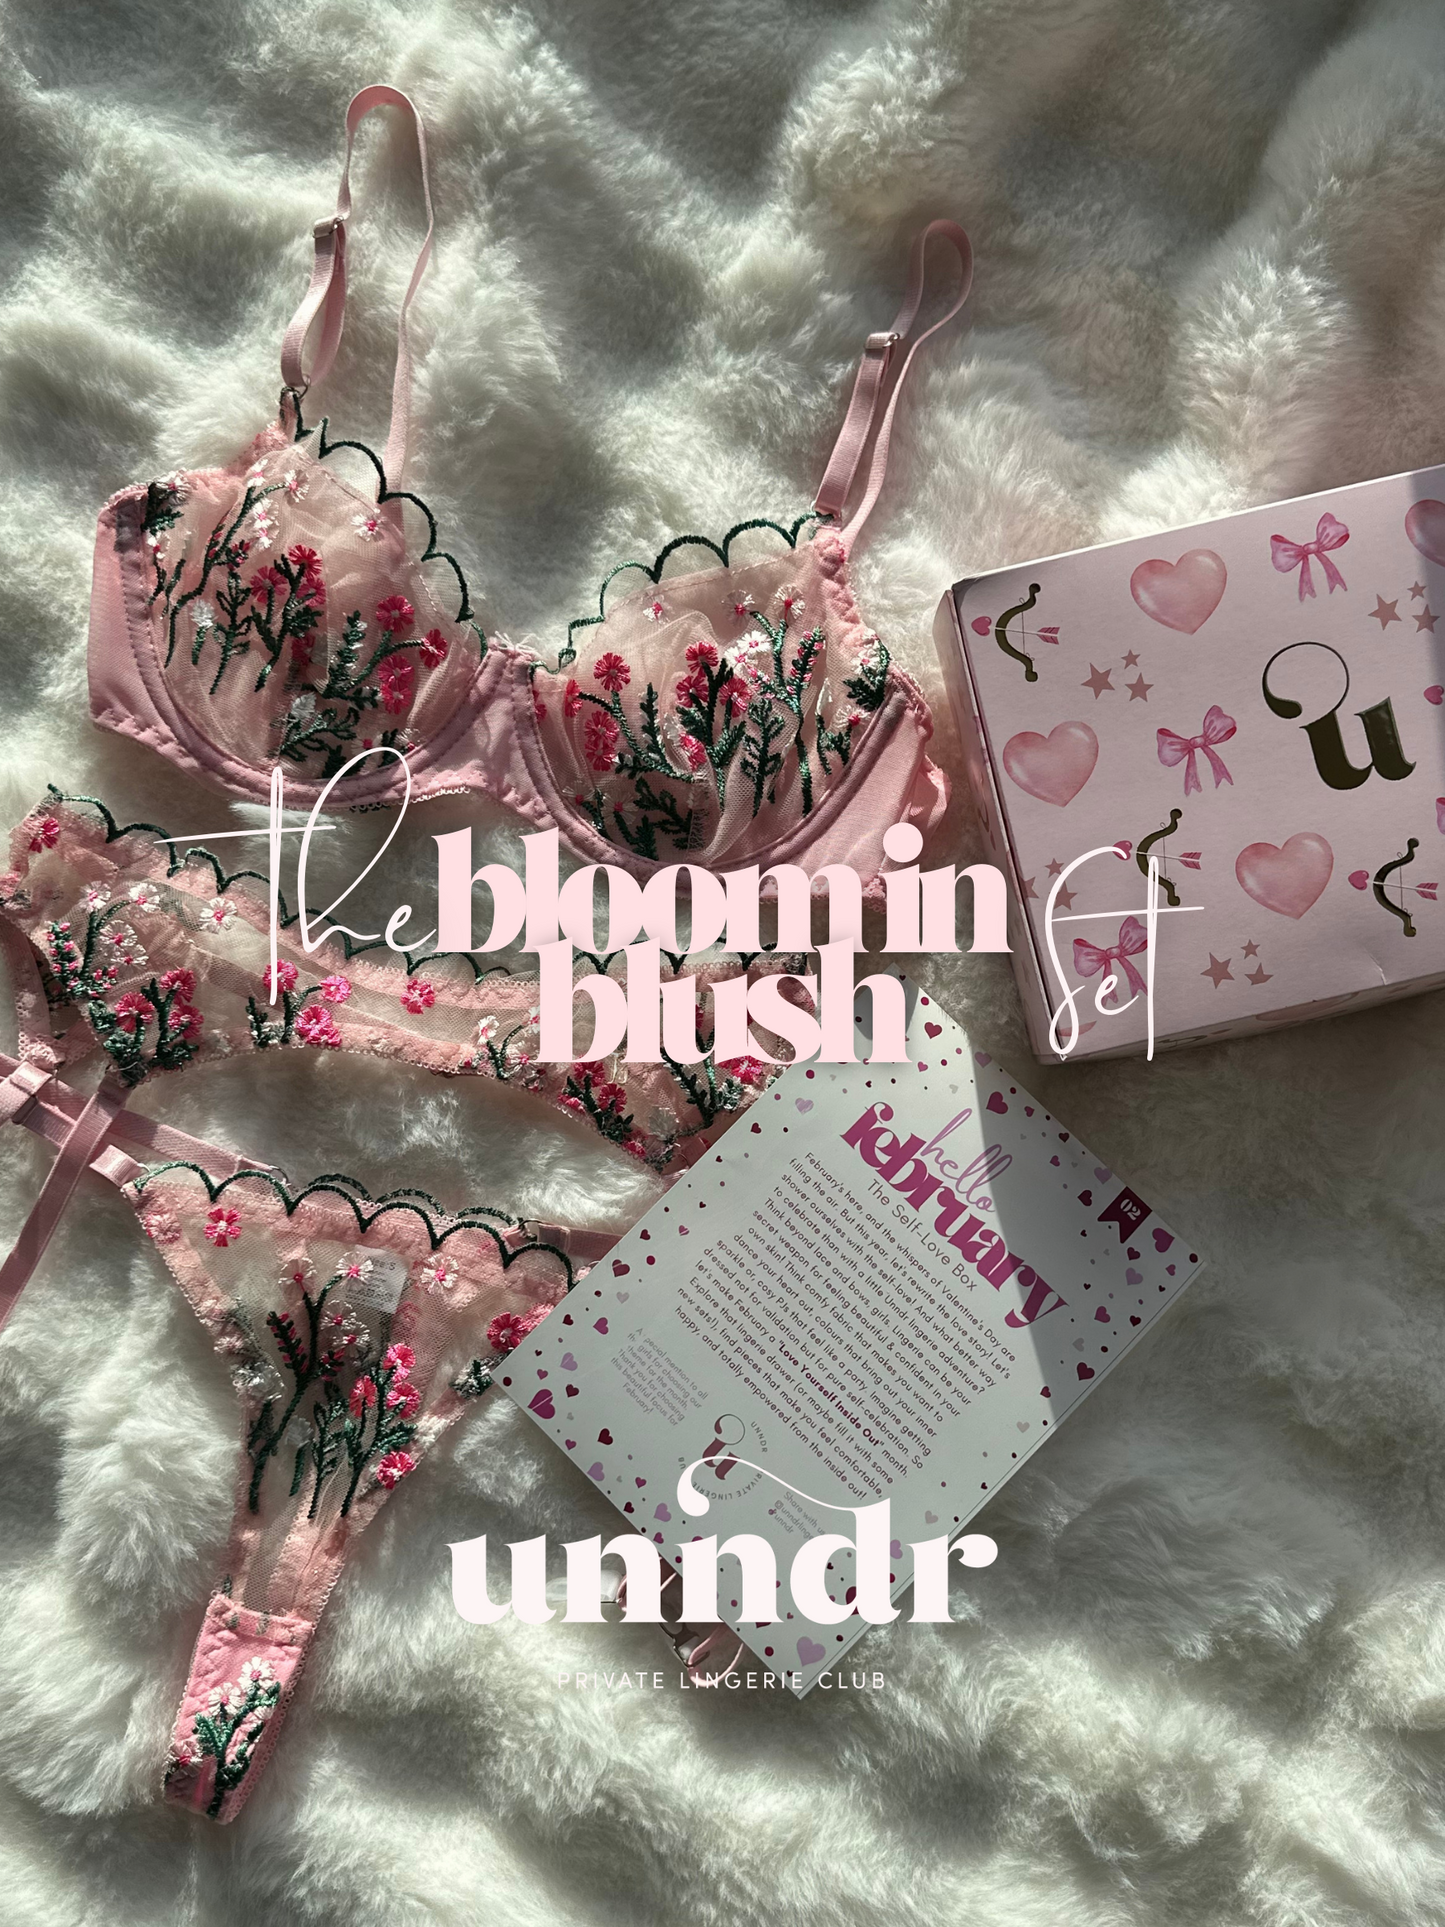 The Bloom in Blush Set